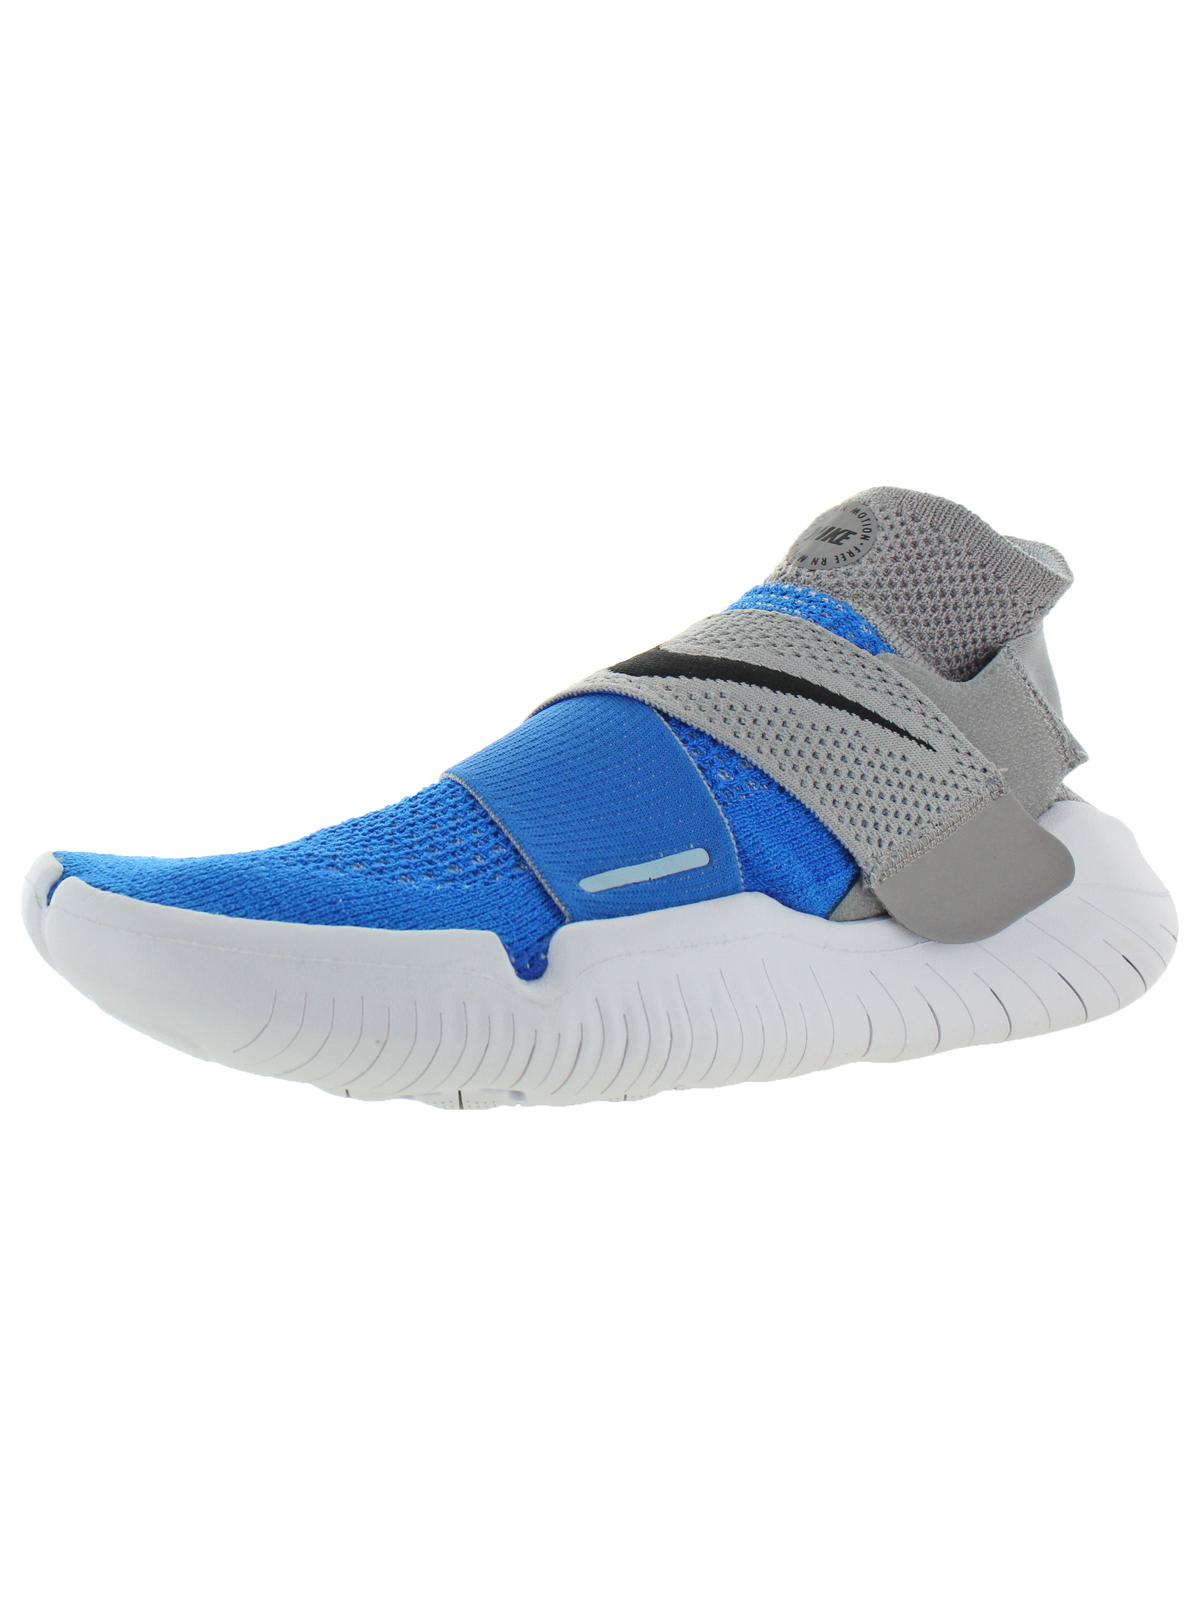 Buy Nike Mens Free RN Motion 2017 Low Top Slip Trail Running, Blue, Size 11.5 Online at Lowest Price in Ubuy Botswana. 768587500